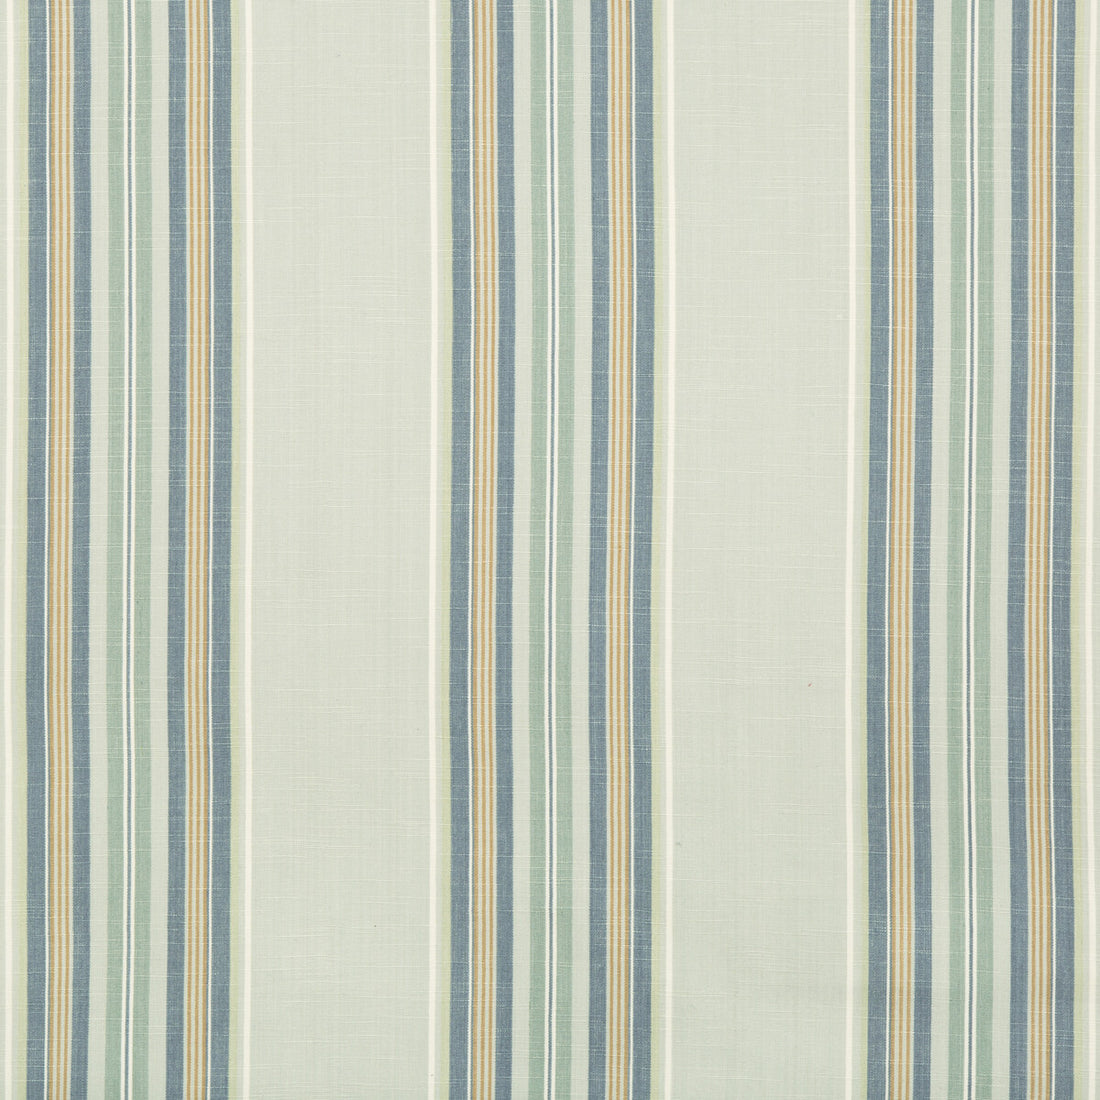 Verdon Stripe fabric in sea/blue color - pattern 8017101.135.0 - by Brunschwig &amp; Fils in the Durance collection